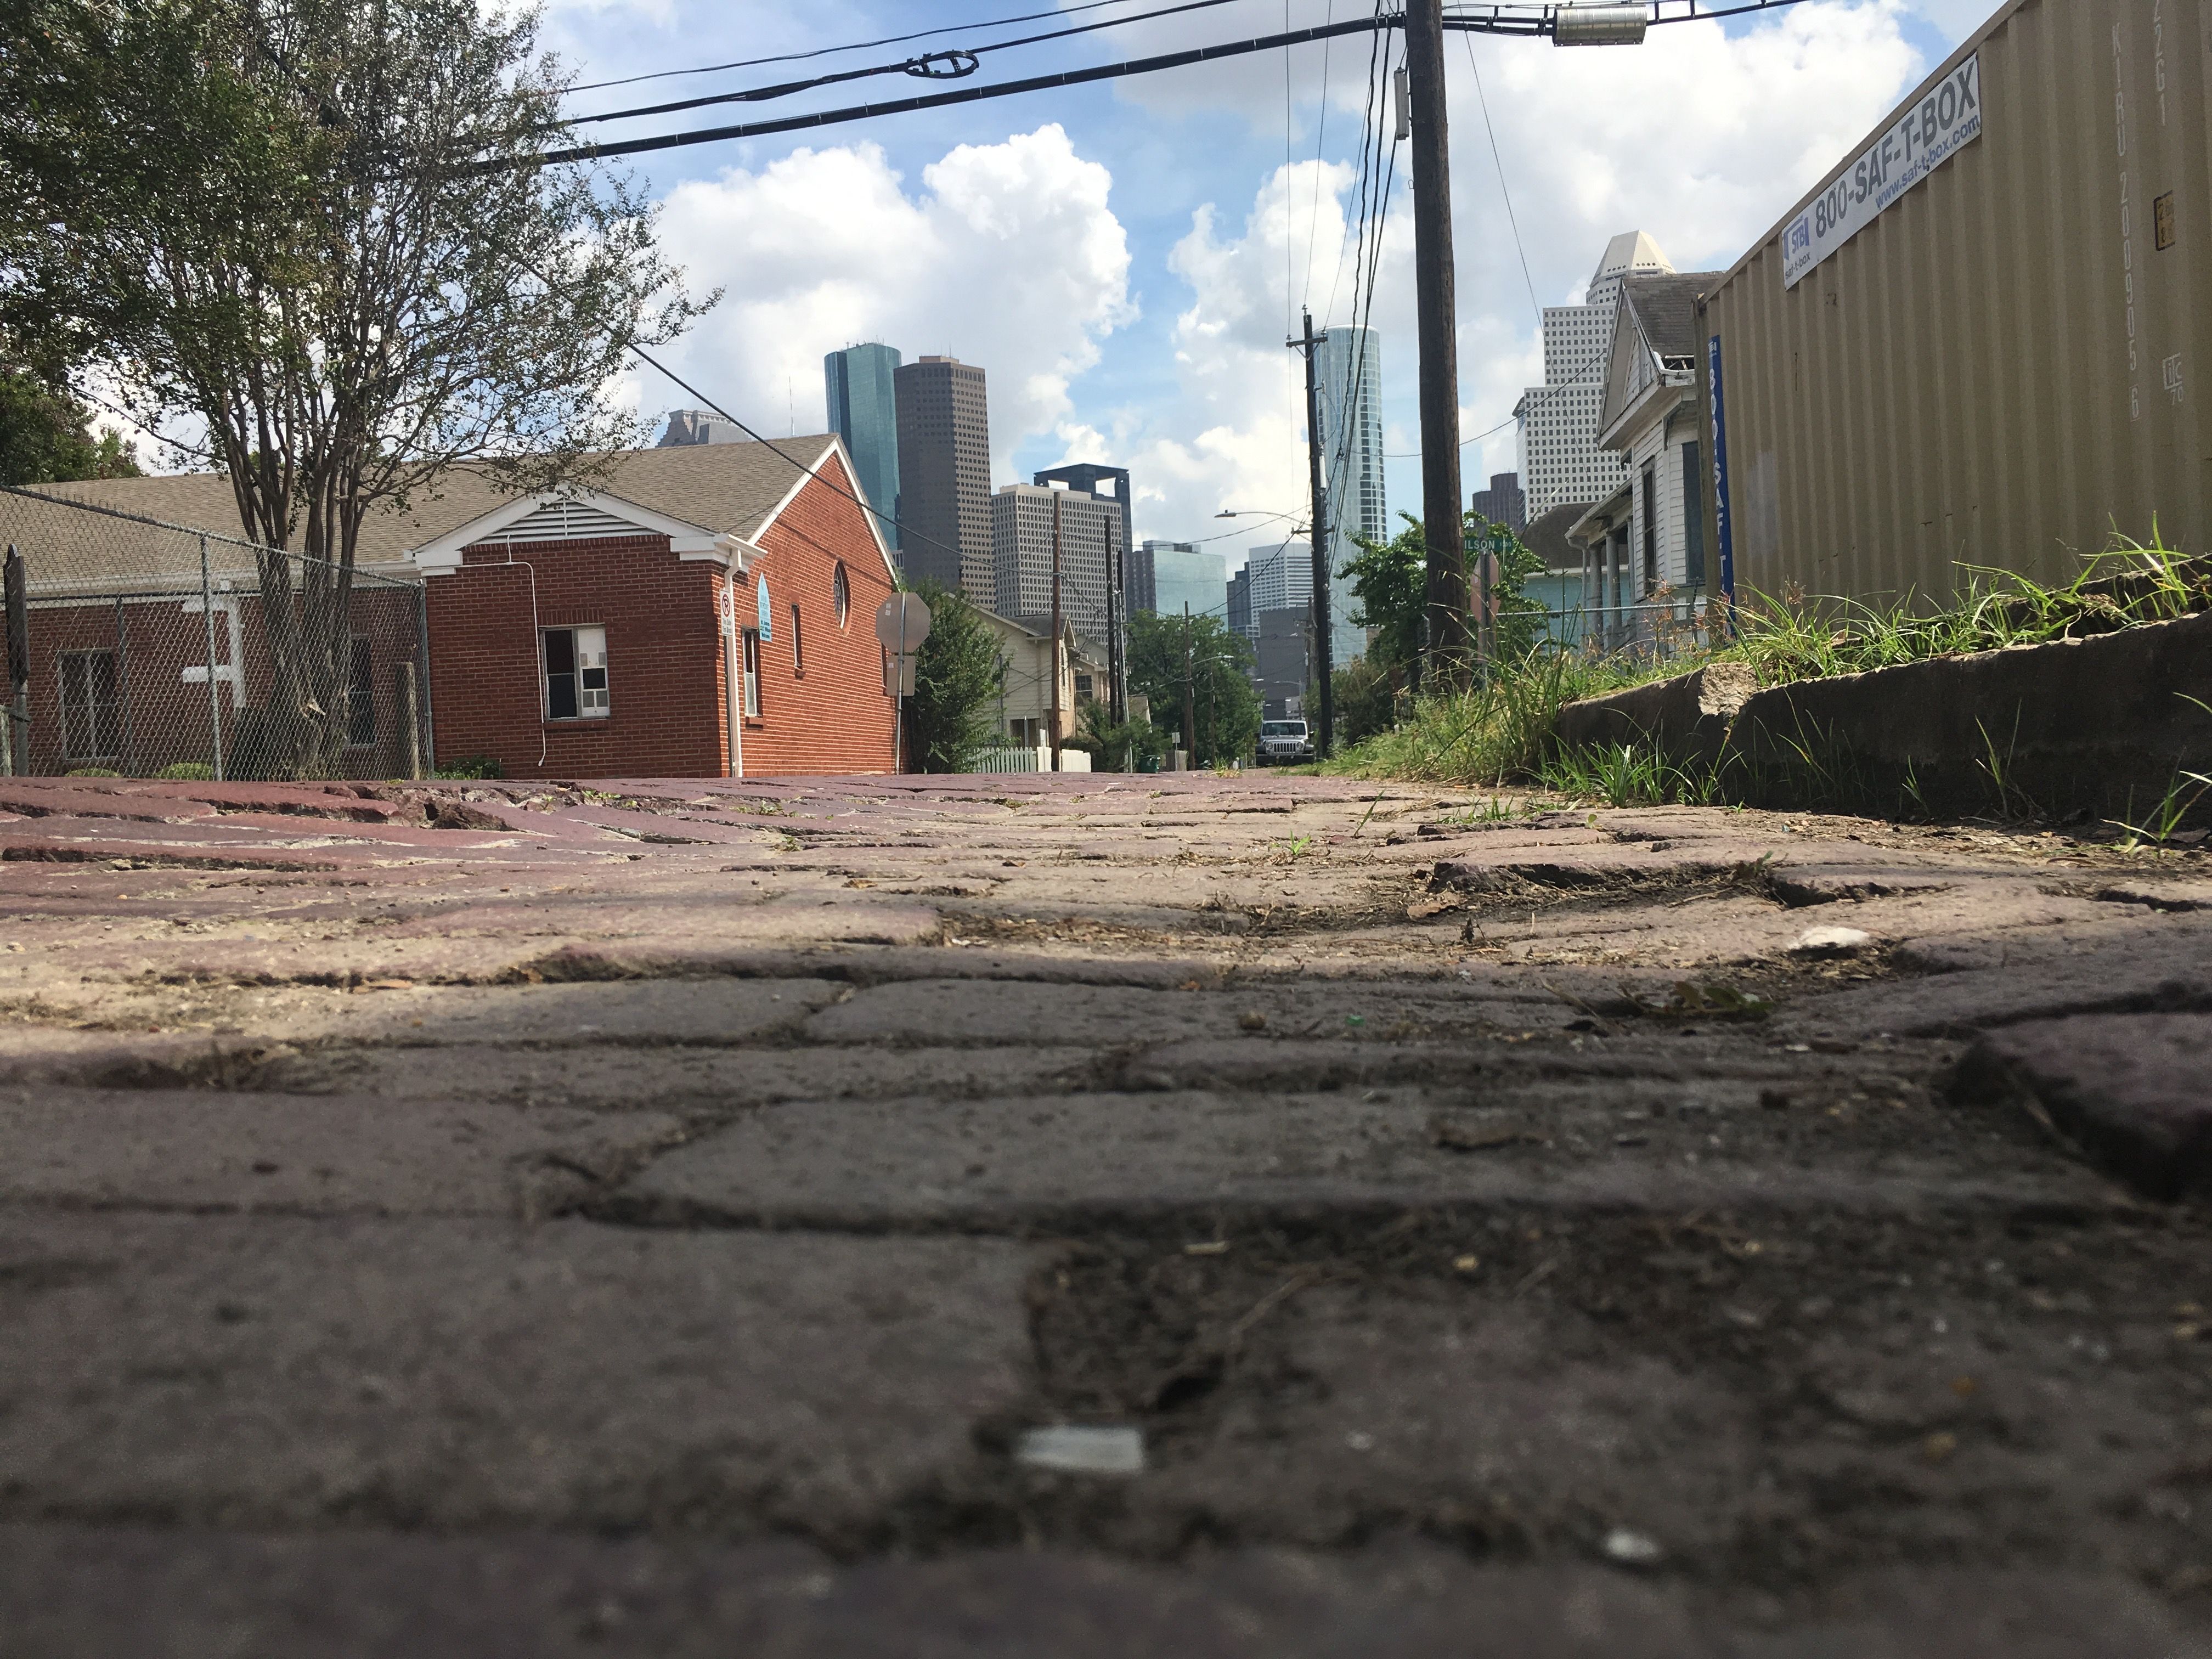 Bricks laid by emancipated enslaved people at Freedmen’s Town in Houston are shown with the city's modern skyline. 